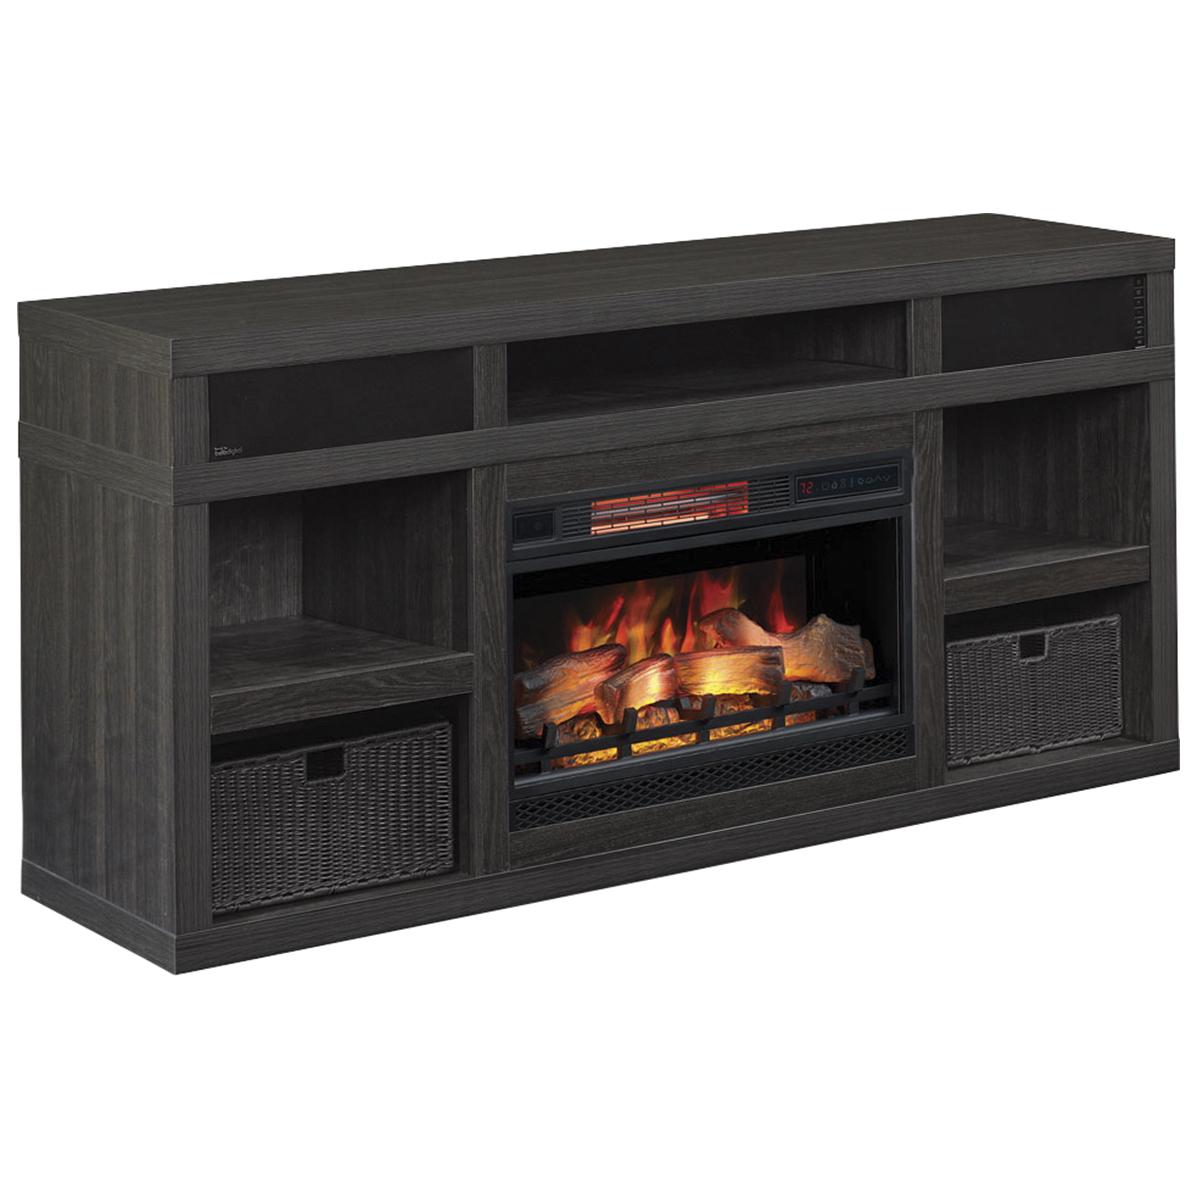 Twin Star Electric Fireplace Troubleshooting Elegant Fabio Flames Greatlin 3 Piece Fireplace Entertainment Wall